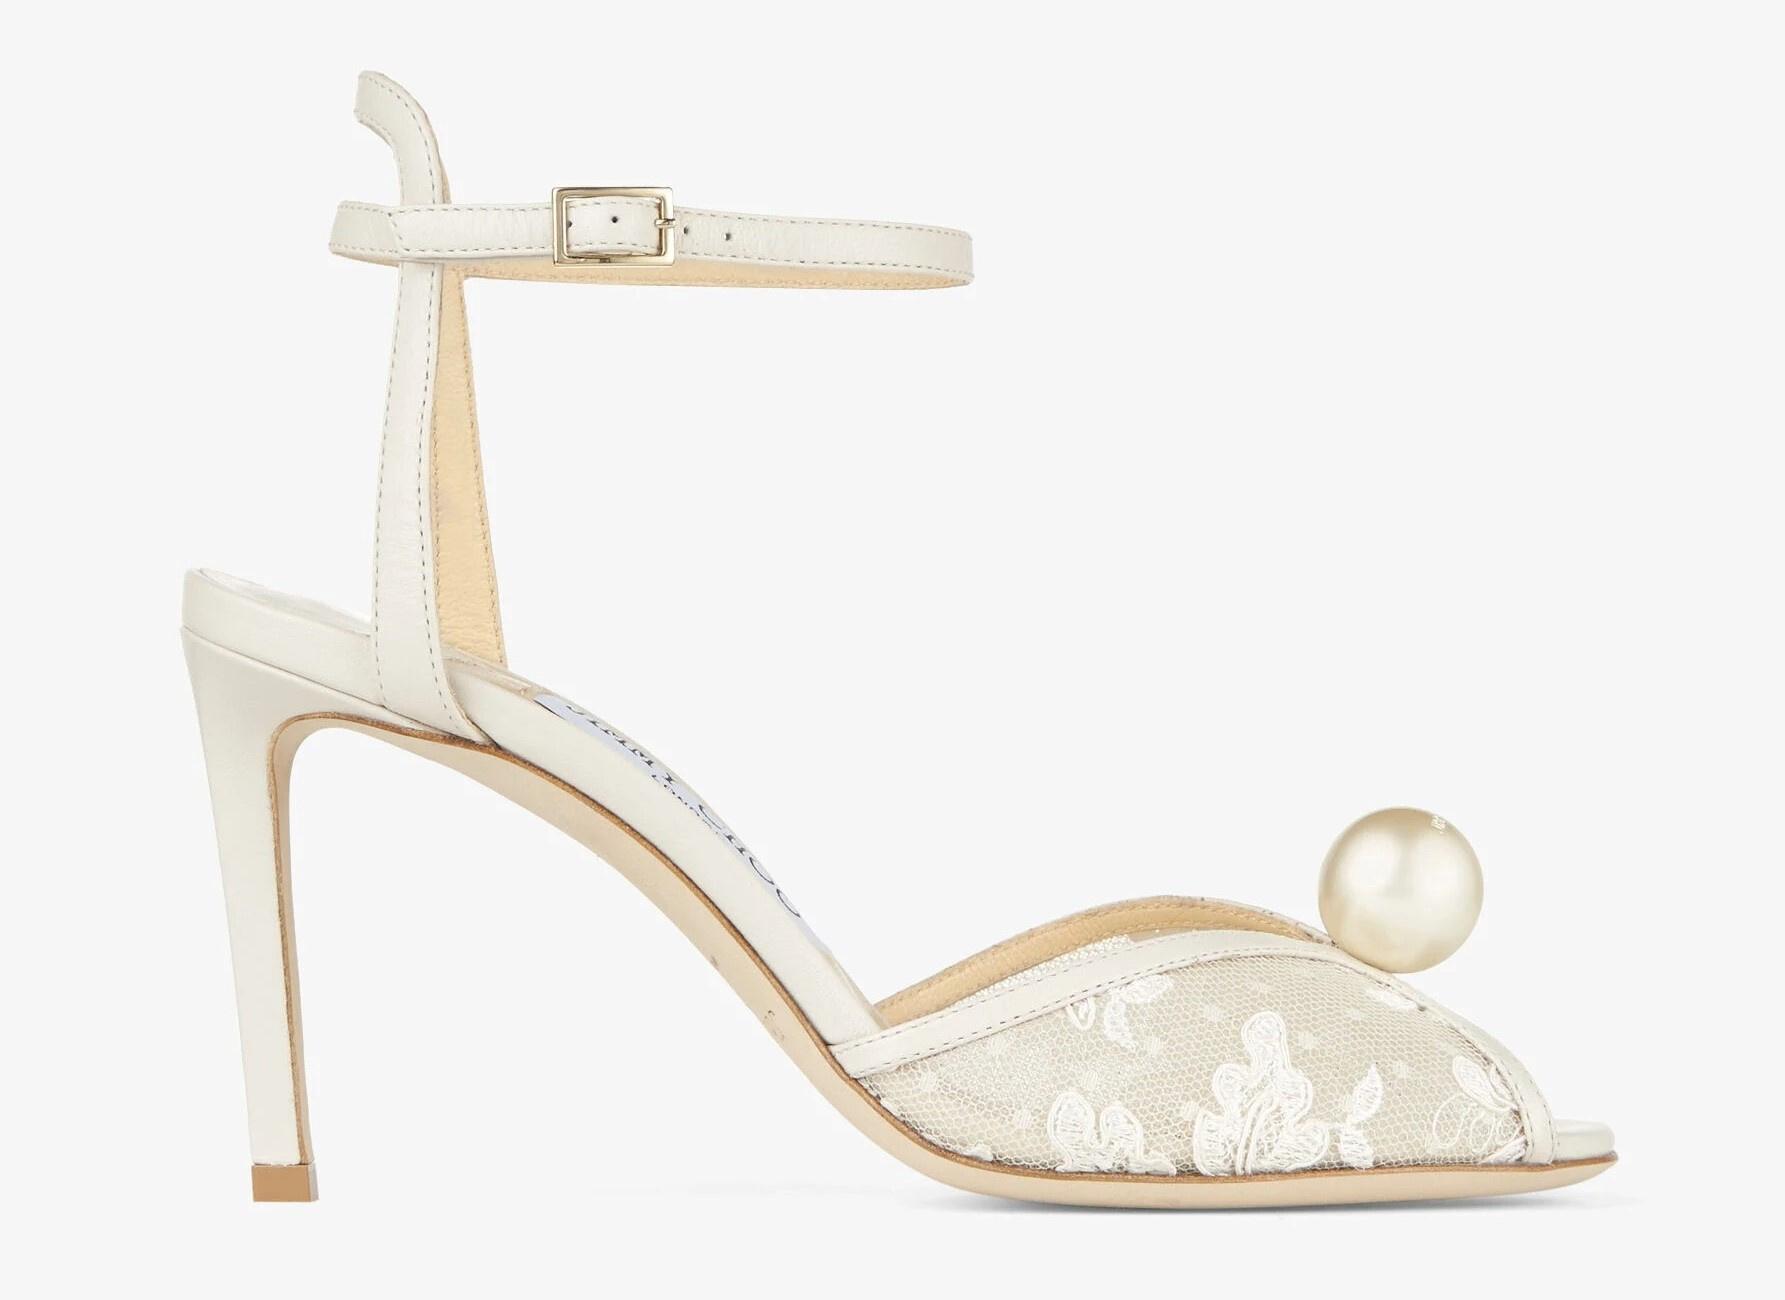 Pearl Wedding Shoes, Heels and Flats: 25 of the Prettiest Bridal Styles ...